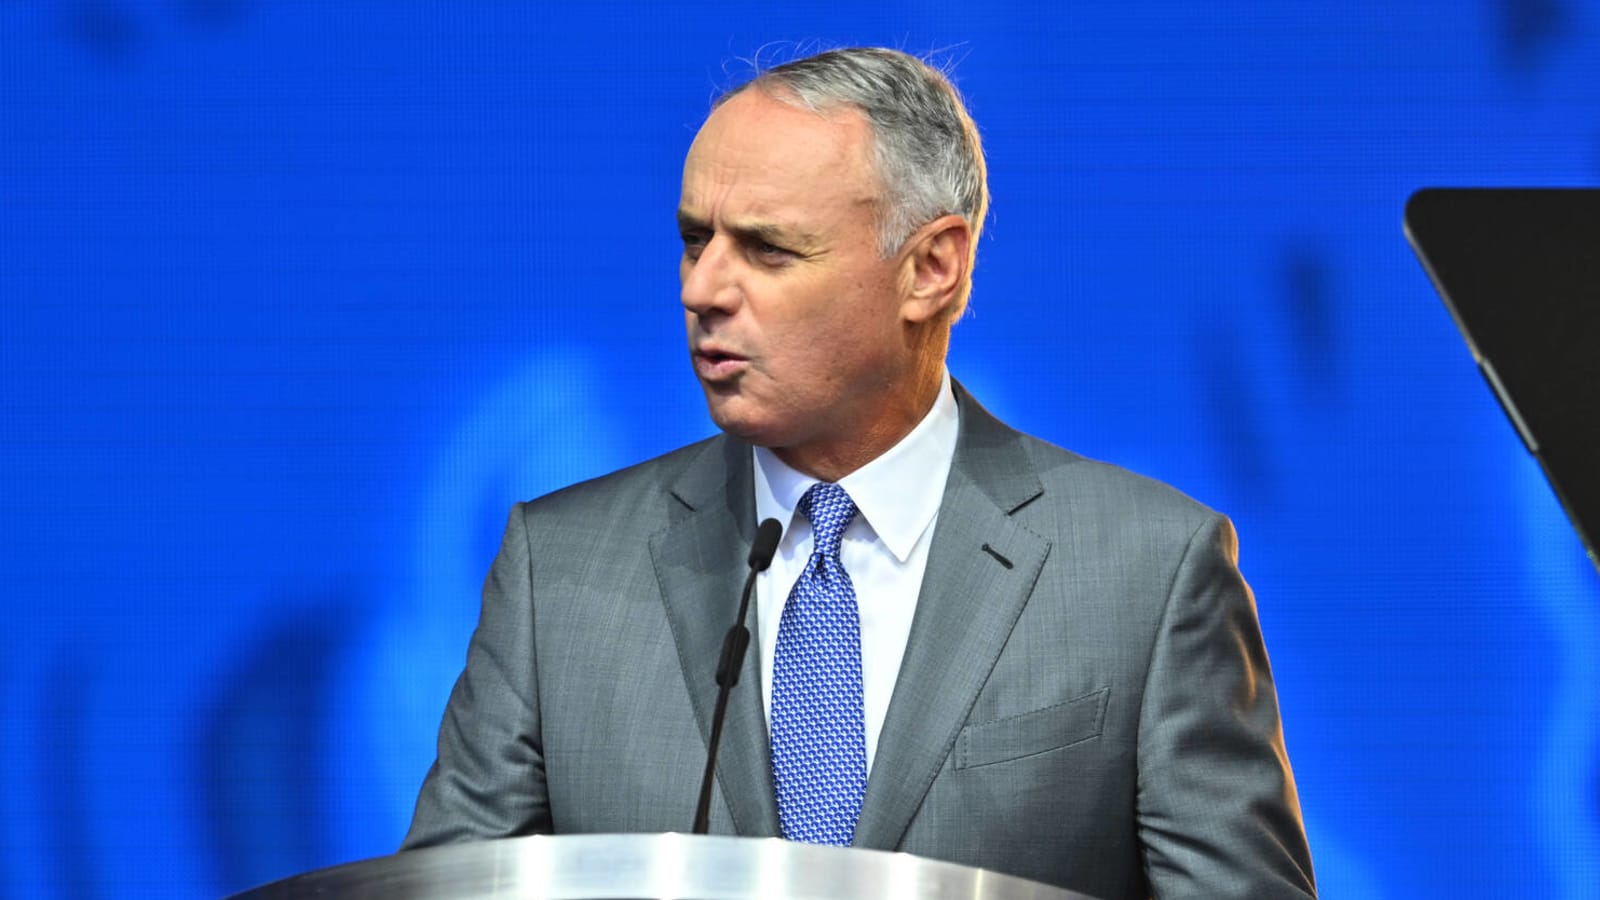 Rob Manfred ripped over All-Star Game uniforms comment